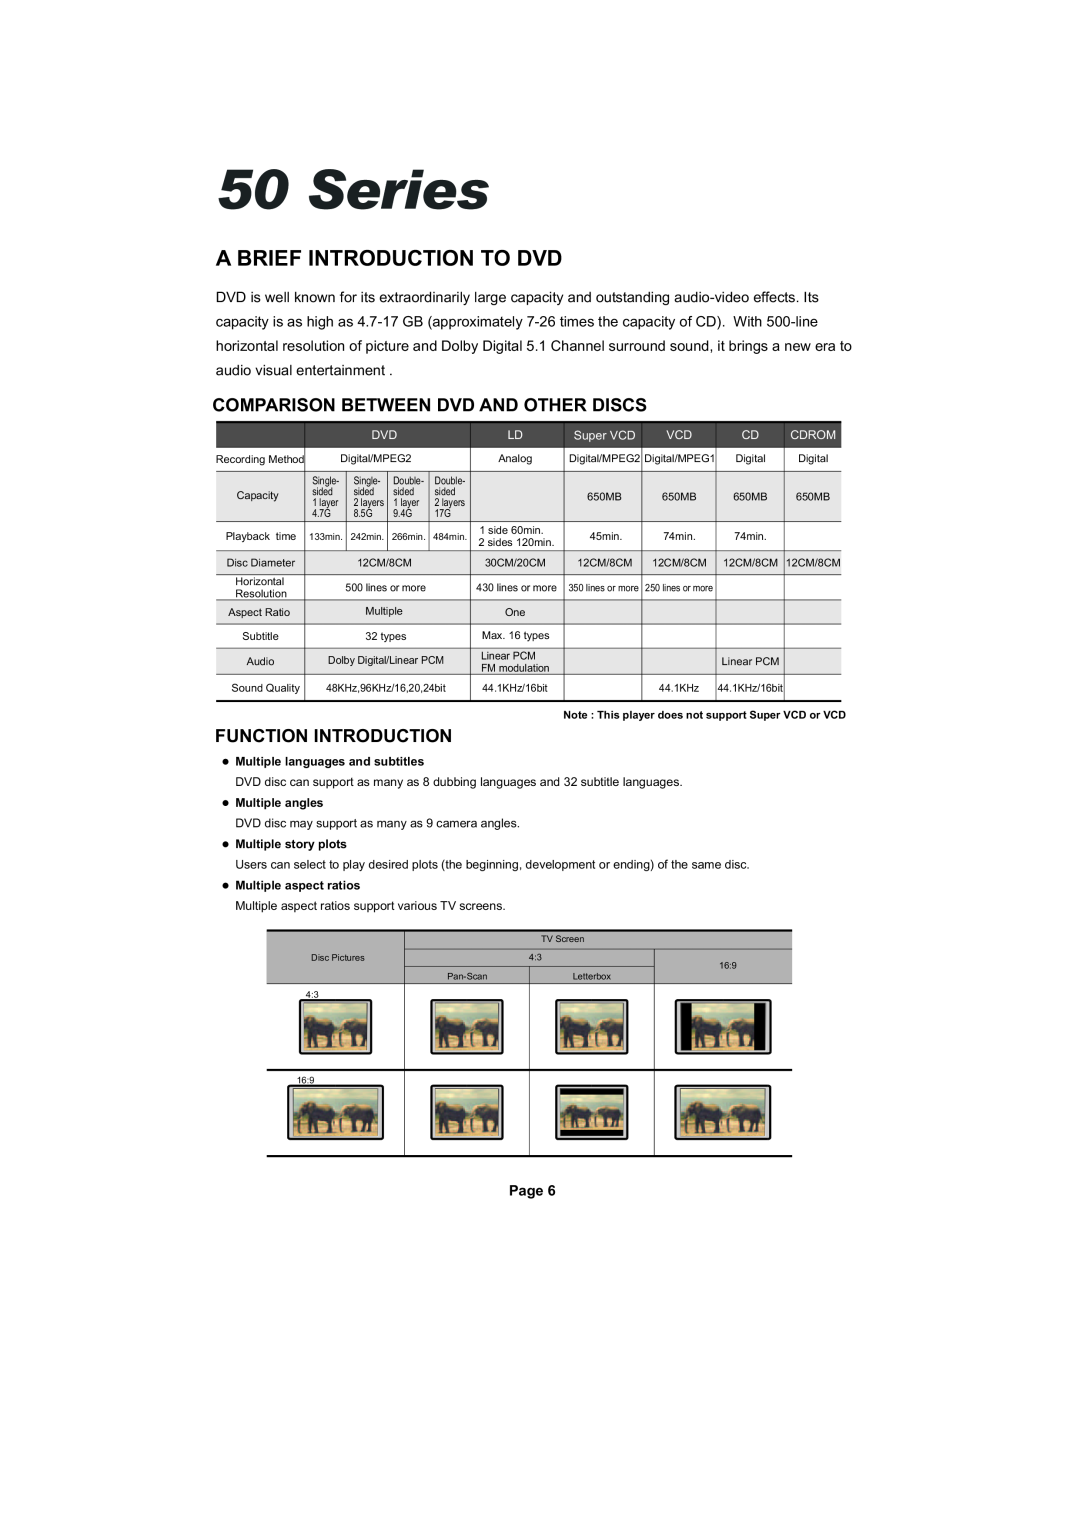 Cambridge Audio SERIES50 A Brief Introduction To Dvd, Comparison Between Dvd And Other Discs, Function Introduction, Page 